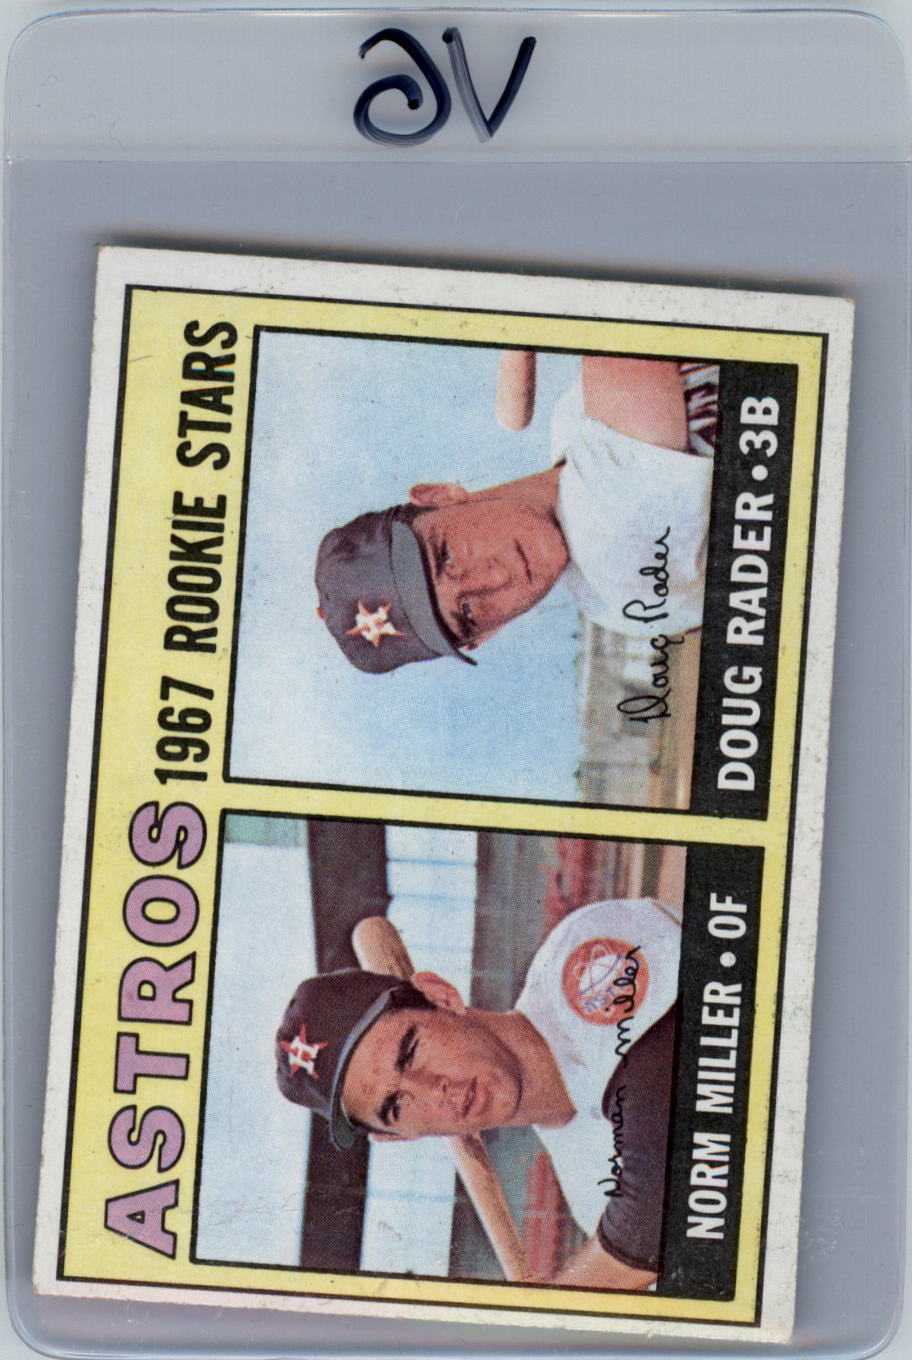 1967 Topps #412 Rookie Stars/Norm Miller RC/Doug Rader RC